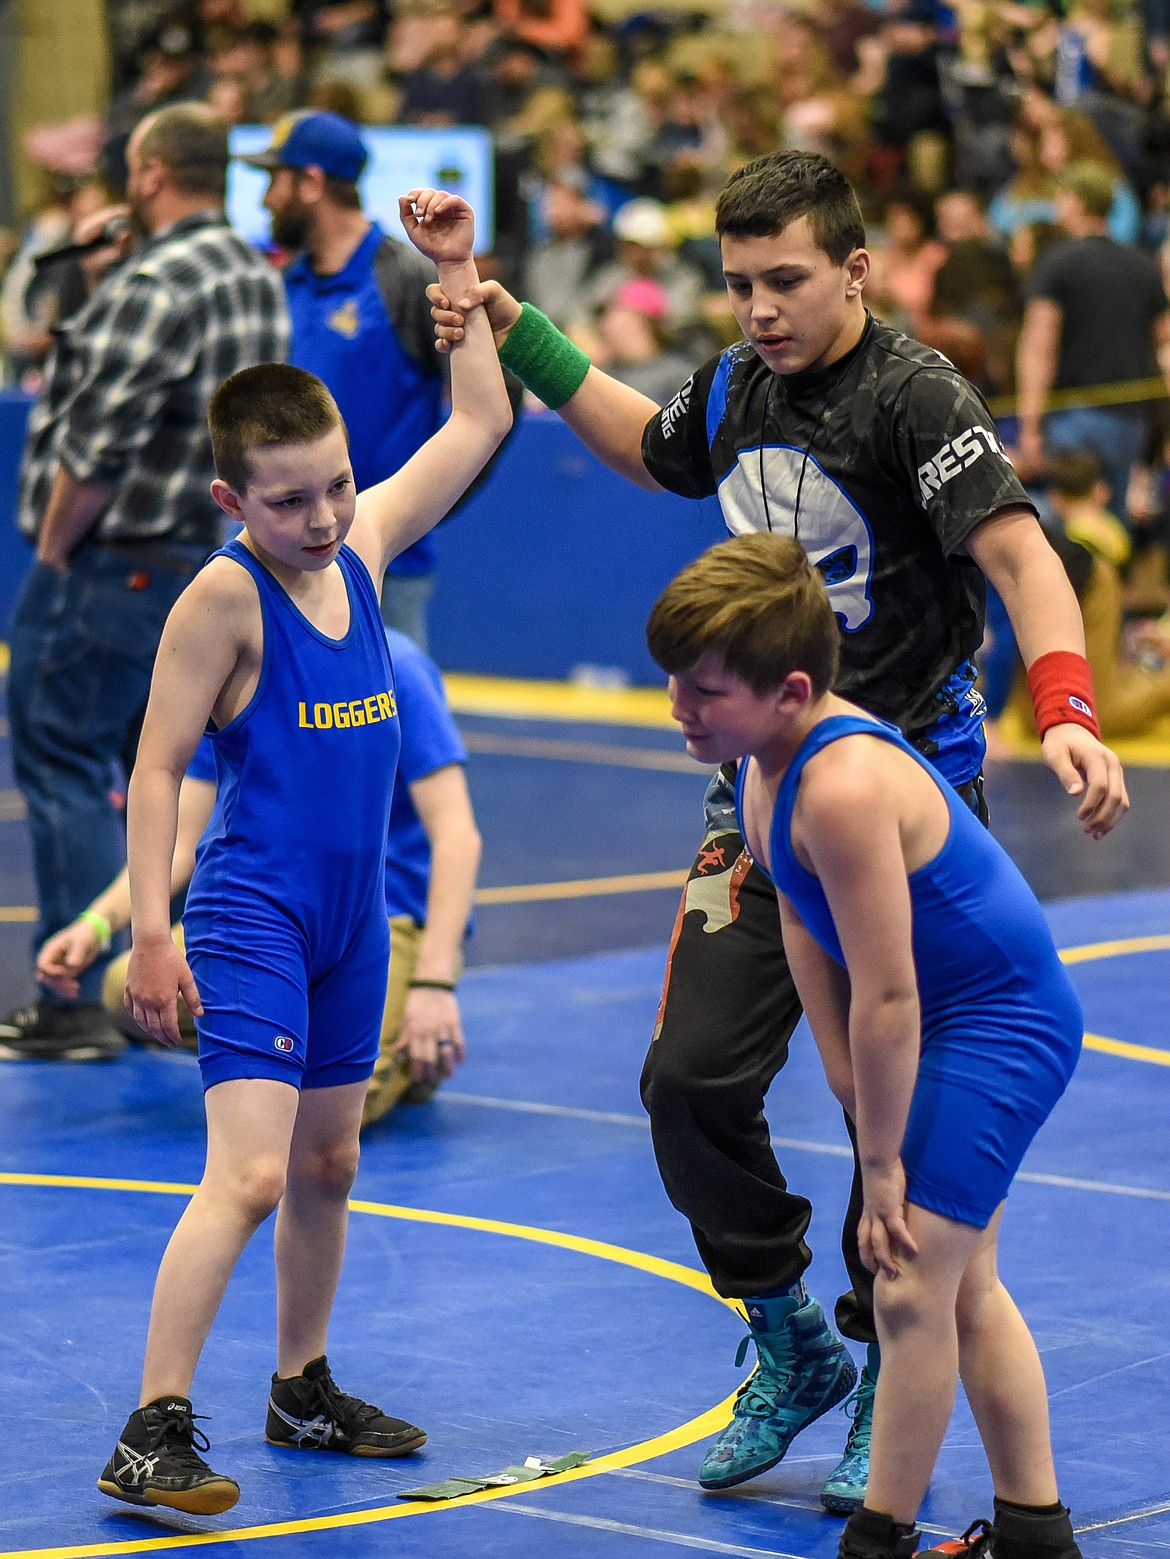 Hunter Rooney of Libby is declared winner after a 5-2 decision against Hunter Strandberg of Columbia Falls at the Kootenai Klassic Wrestling Tournament Saturday. (Ben Kibbey/The Western News)